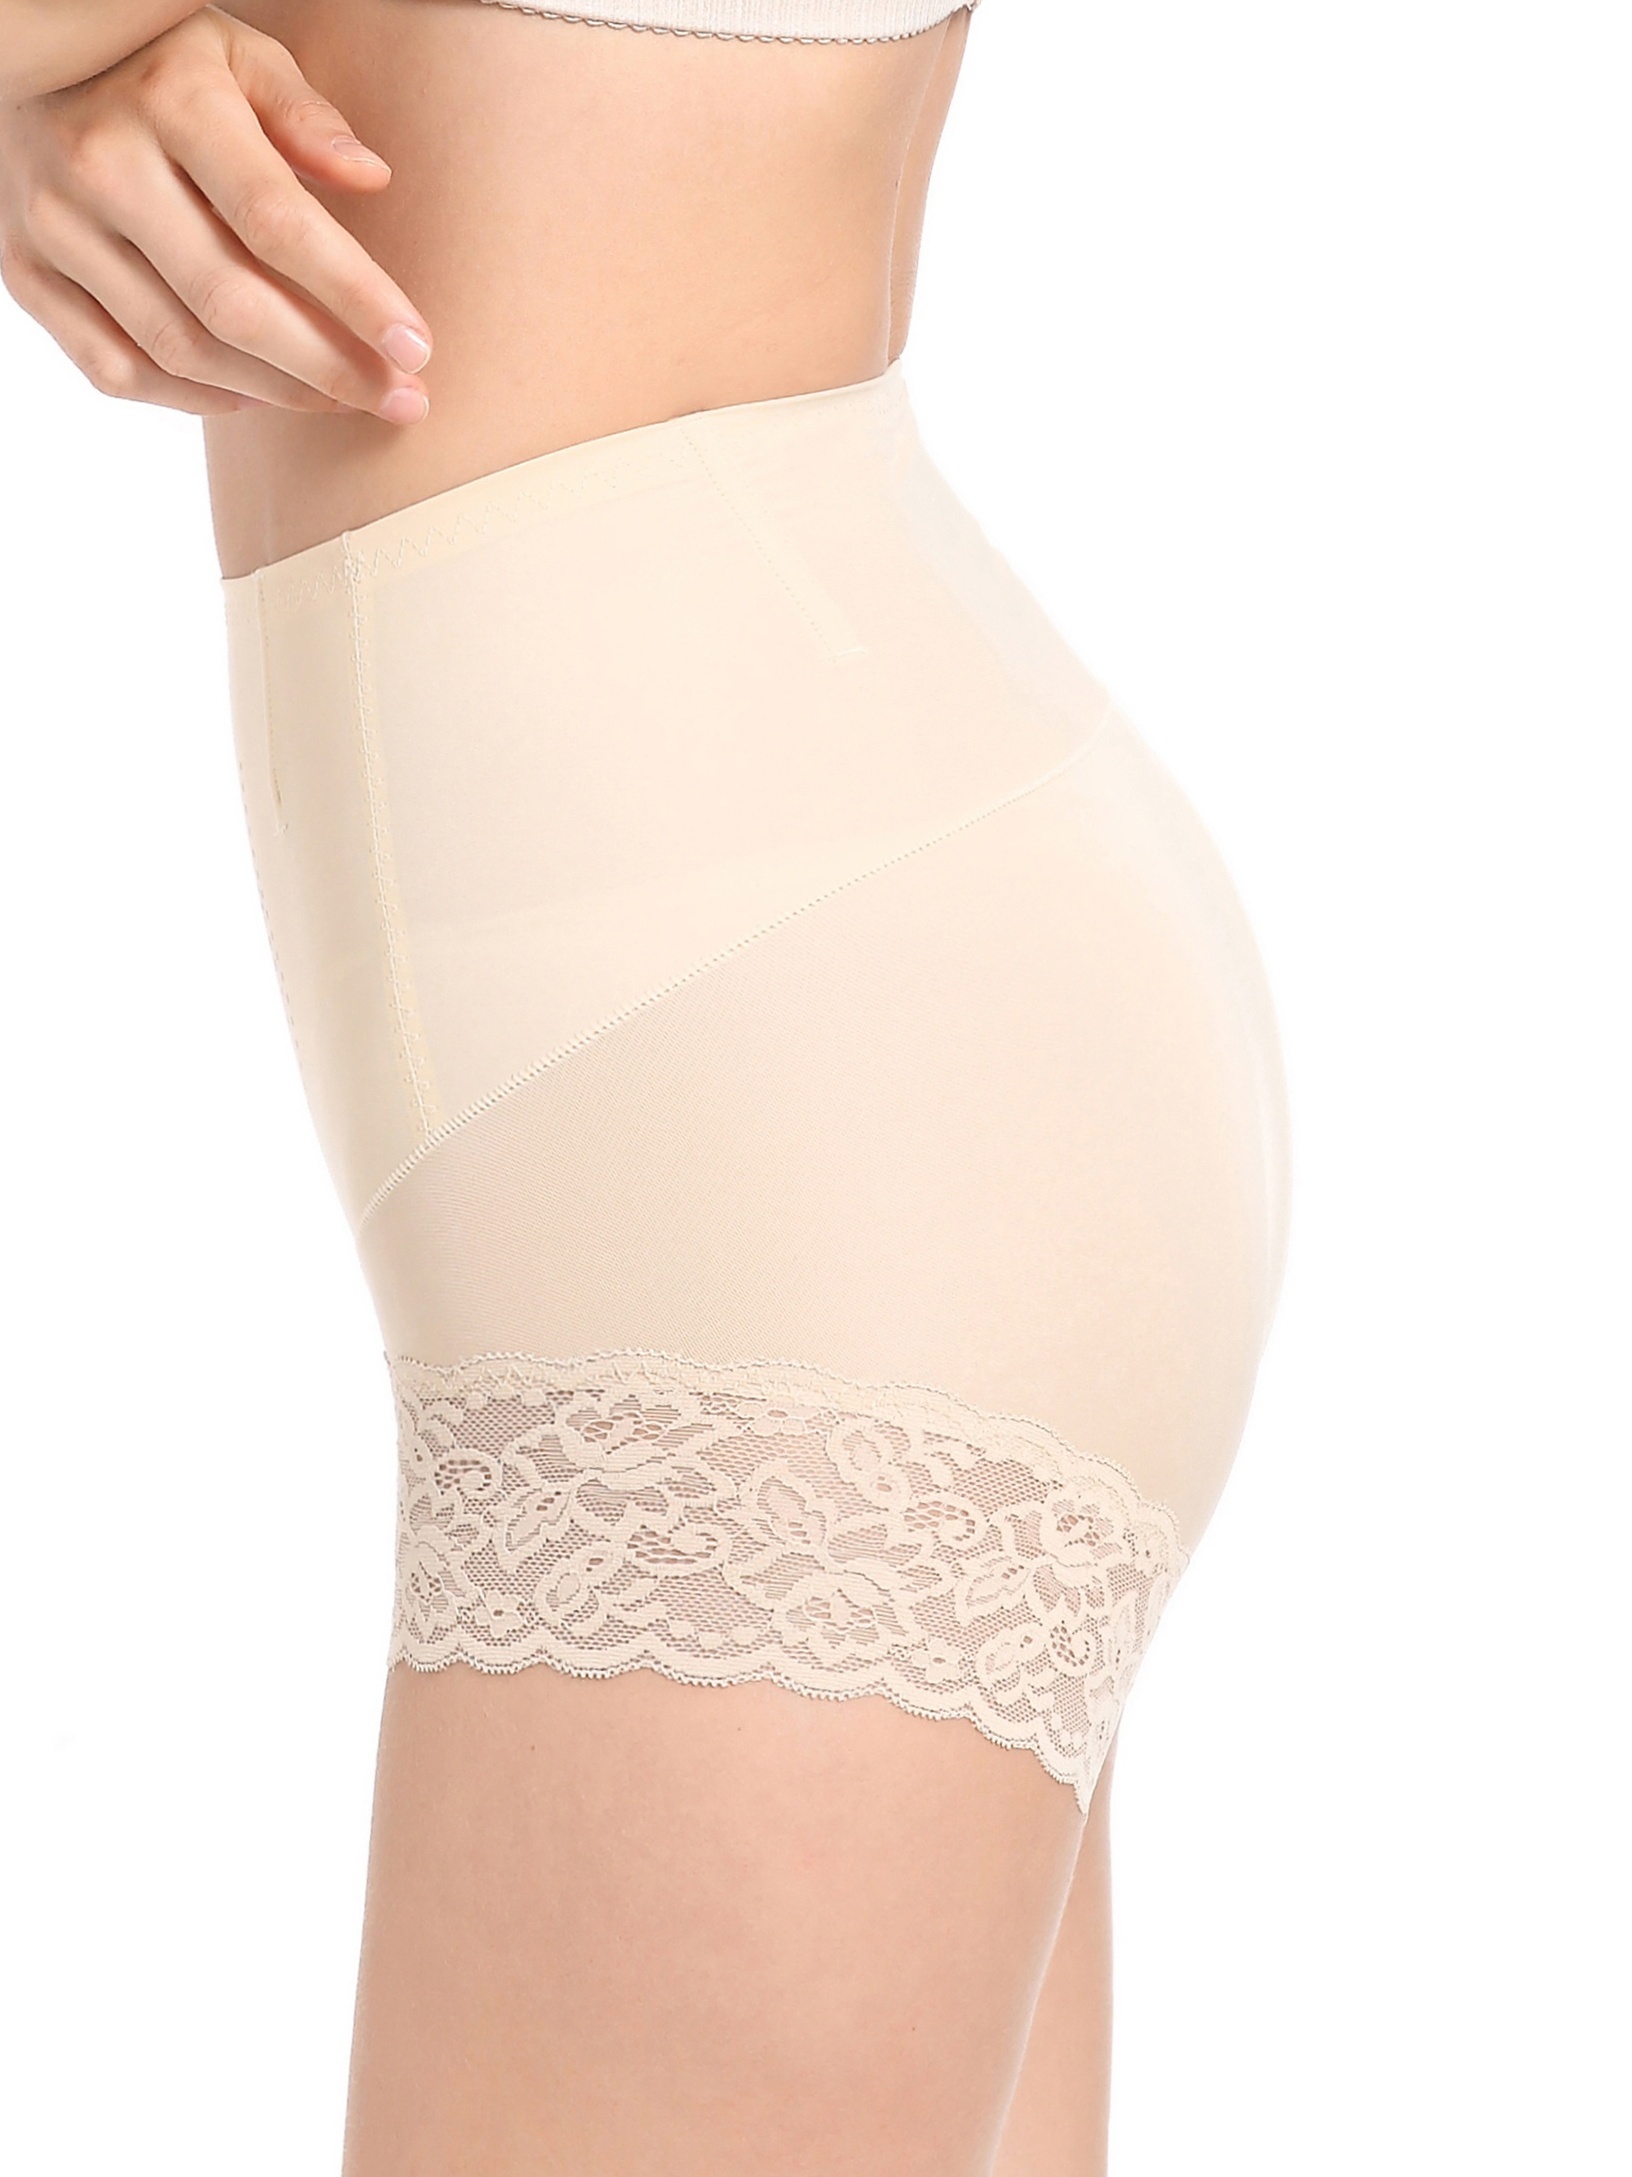 Shapewear Panties For Women, High Waist Butt Lifer Panties, Breathable  Adjustable Breasted Body Shaper To Lift And Shape Buttocks, Women's  Underwear 